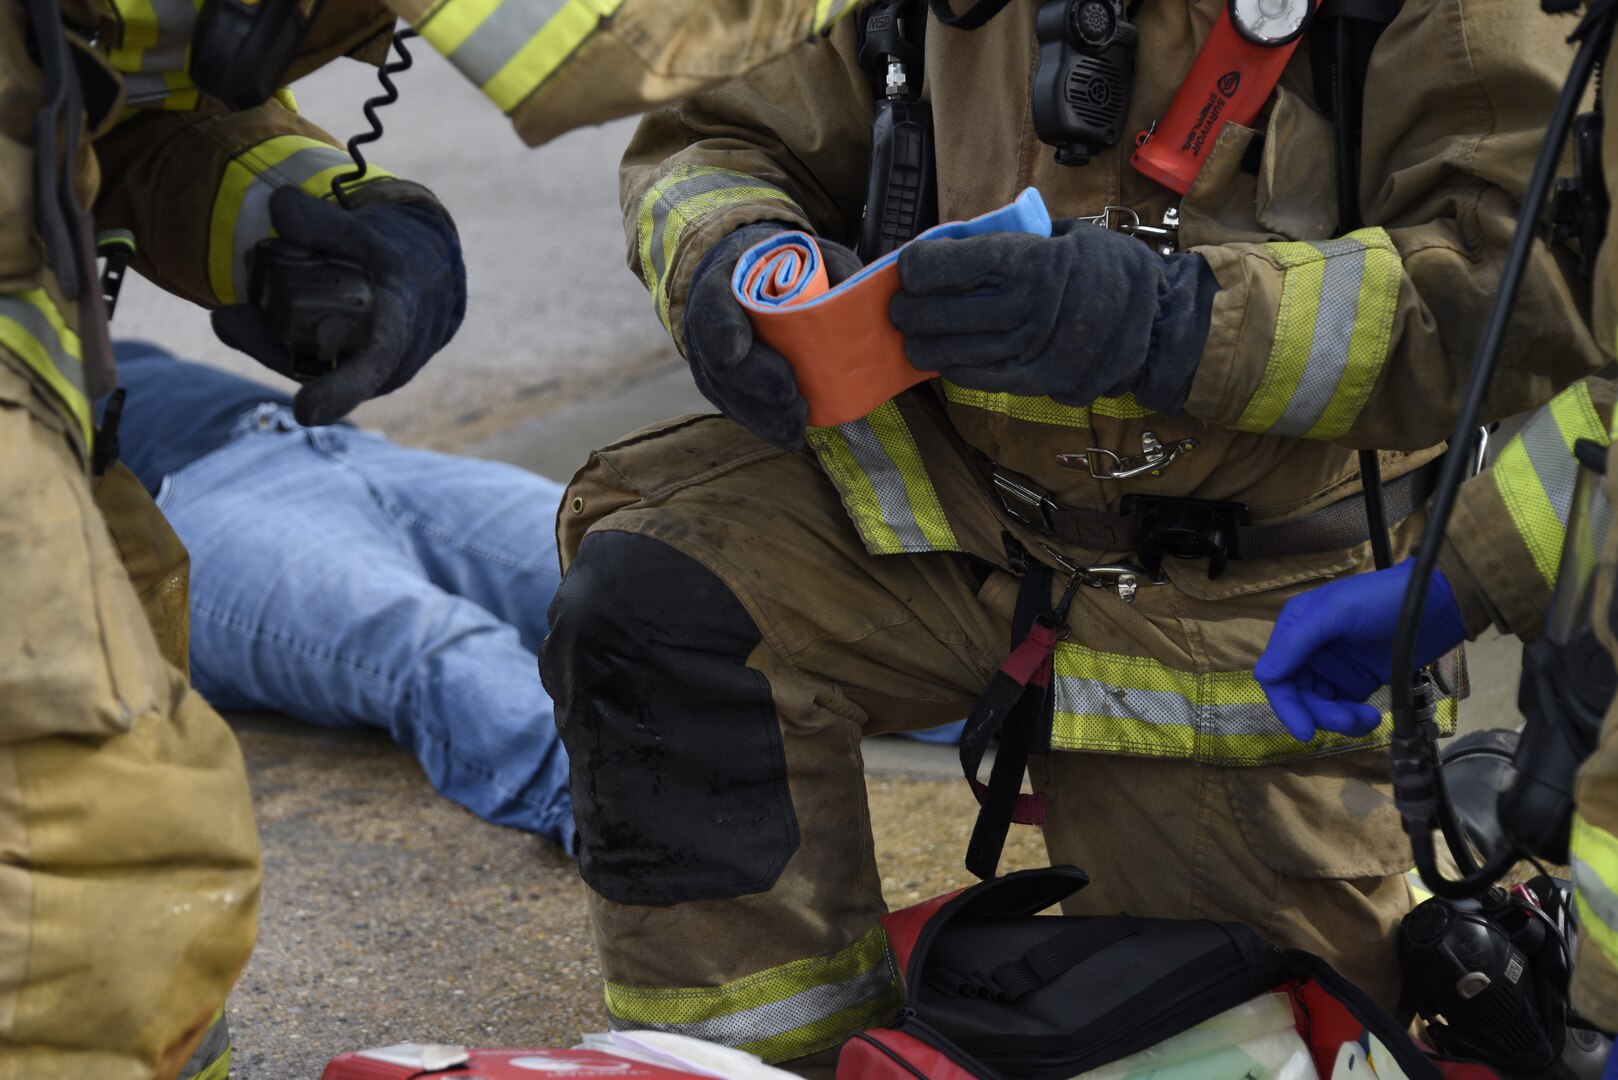 First responders from the 166th Civil Engineer Squadron firefighters apply a compression bandage to a crash victim during Operation Blue Skywalker, April 10, 2019 at Delaware National Guard Base, Del. 166th CES firefighters were first on scene at the mock disaster site. (U.S. Air Force photo by Mr. Mitch Topal)